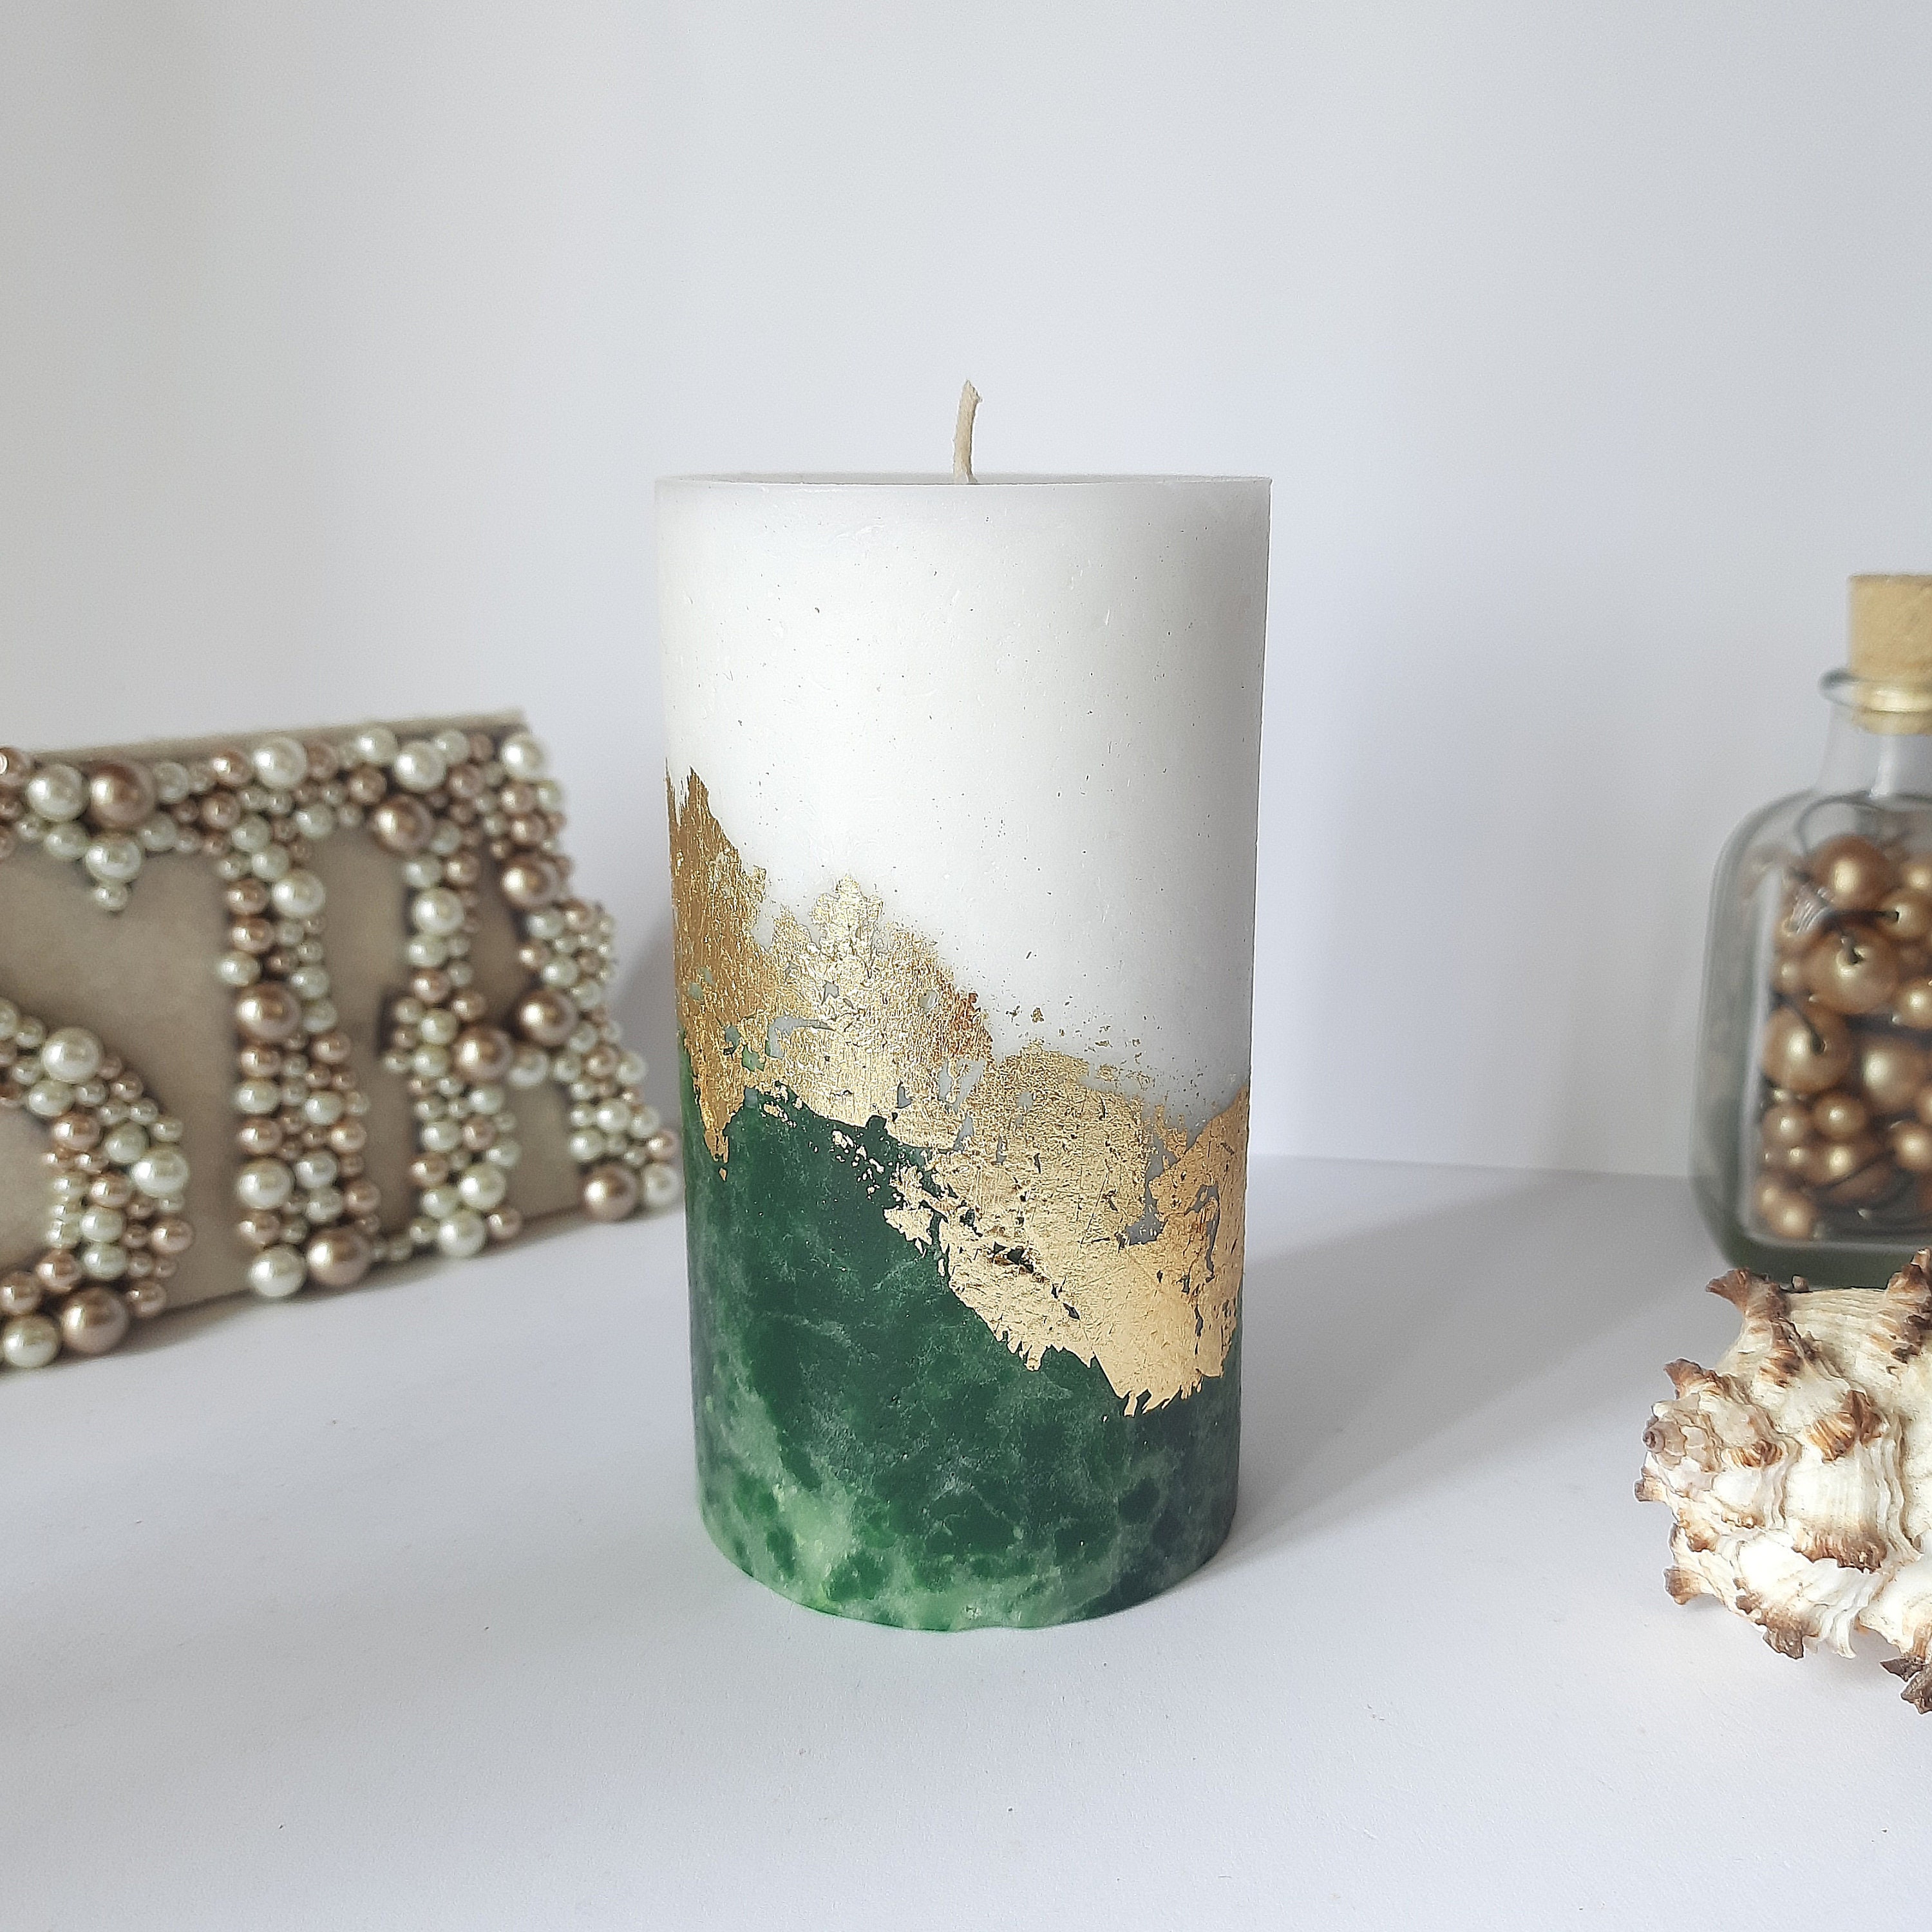 Glitter in candles? : r/candlemaking